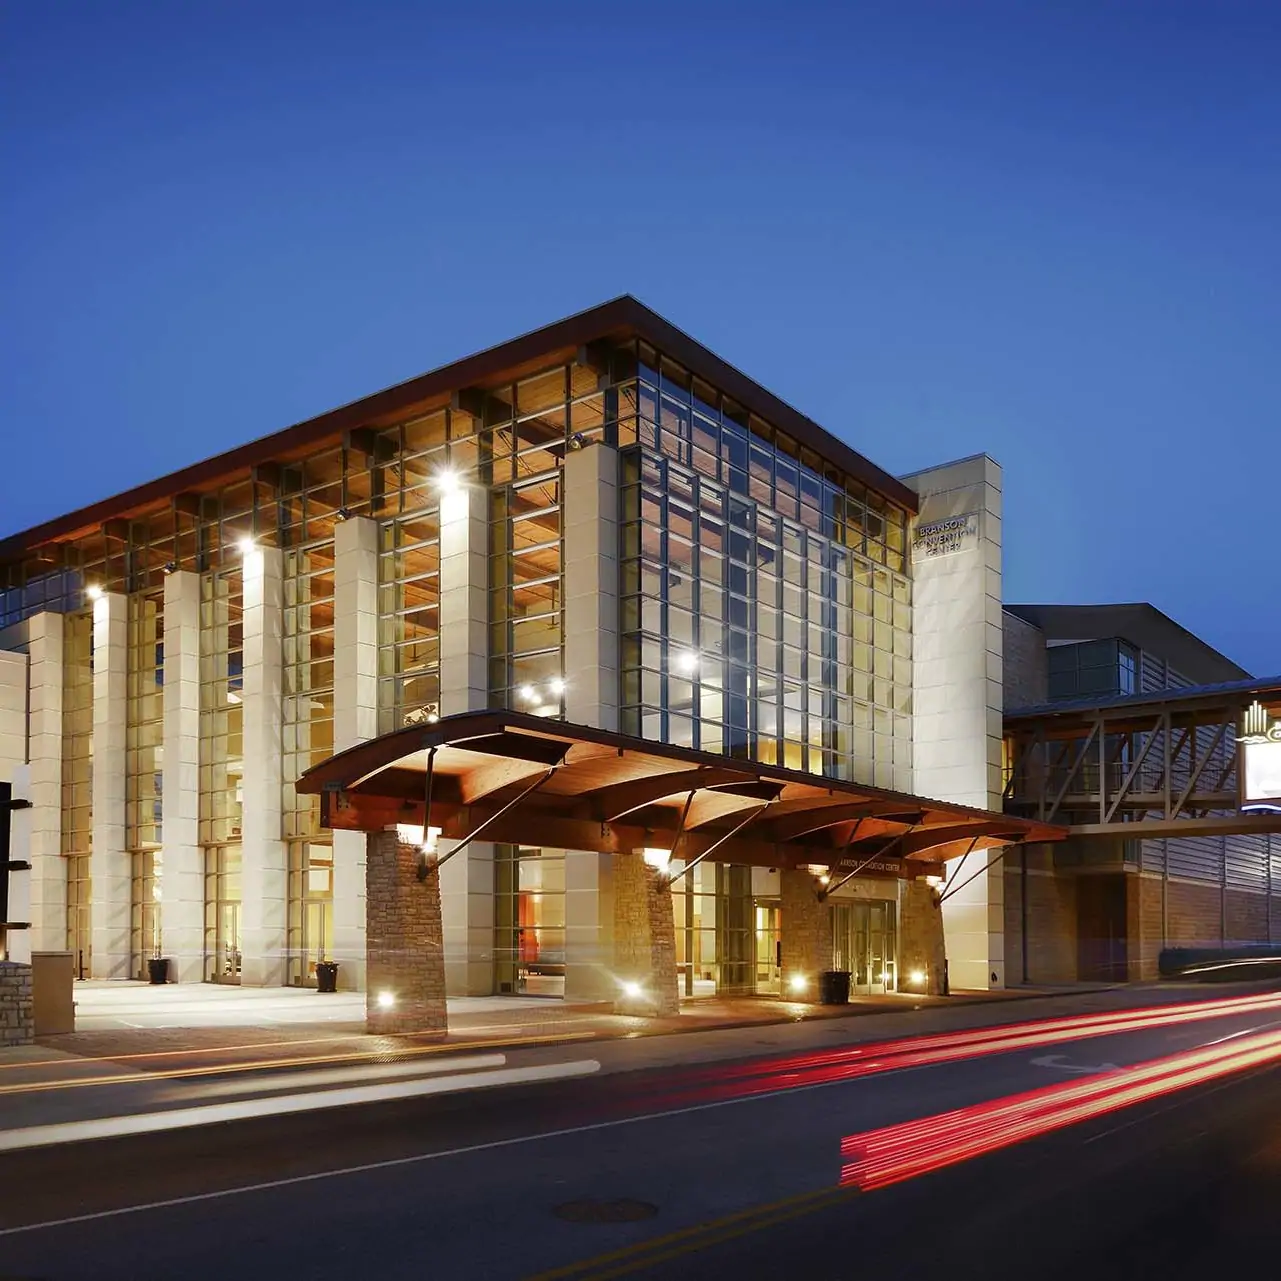 Branson Convention Center main lobby exterior at twilight - Professional Architecture Photographer and Commercial Photography of Buildings